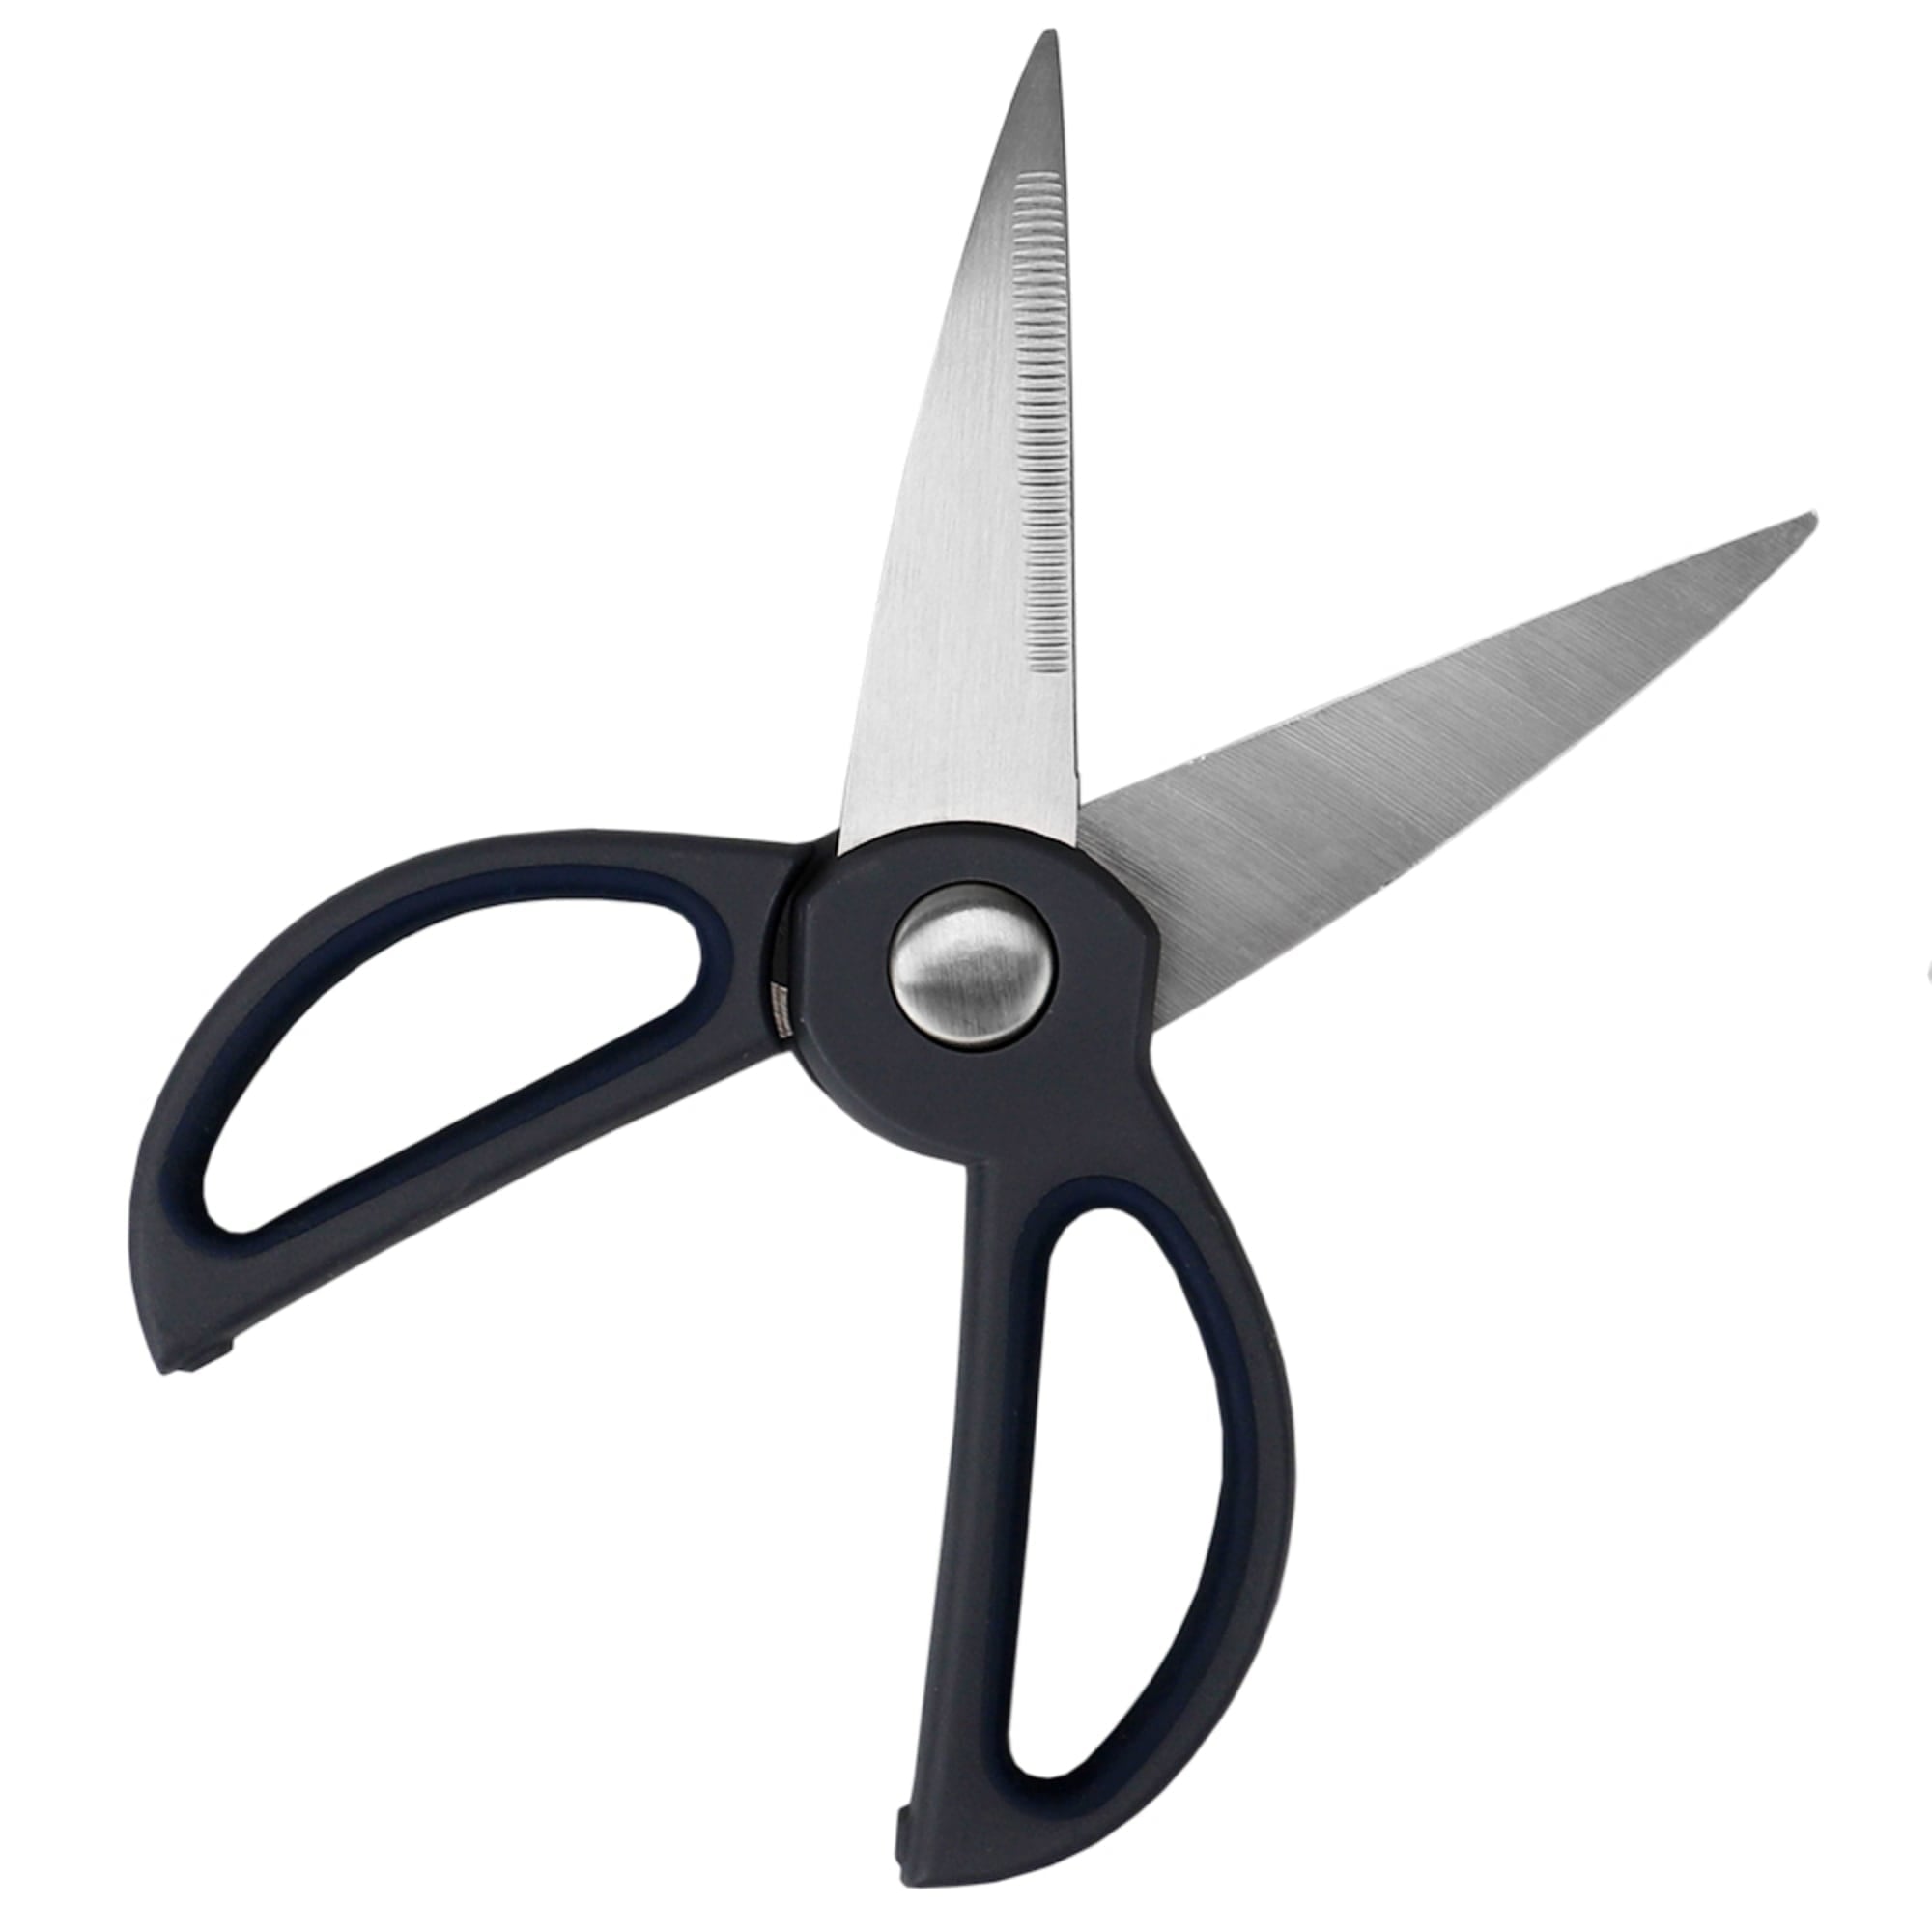 Michael Graves Comfortable Grip All Purpose Stainless Steel Kitchen Shears, Grey $3.00 EACH, CASE PACK OF 24